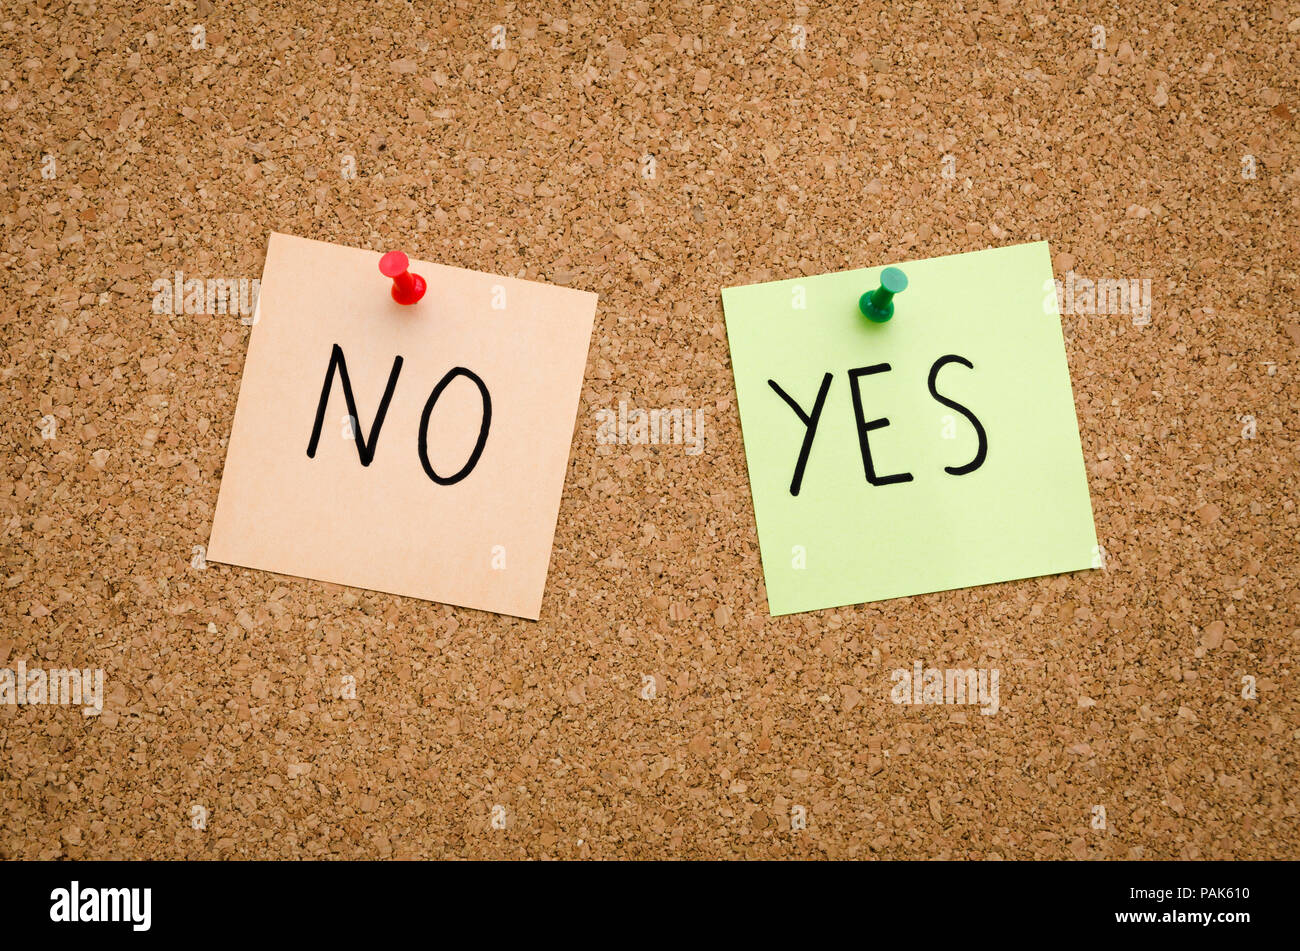 YES NO written on red white and green post notes pinned to a board suggesting options to accept or deny in a bussines look in landscape mode Stock Photo